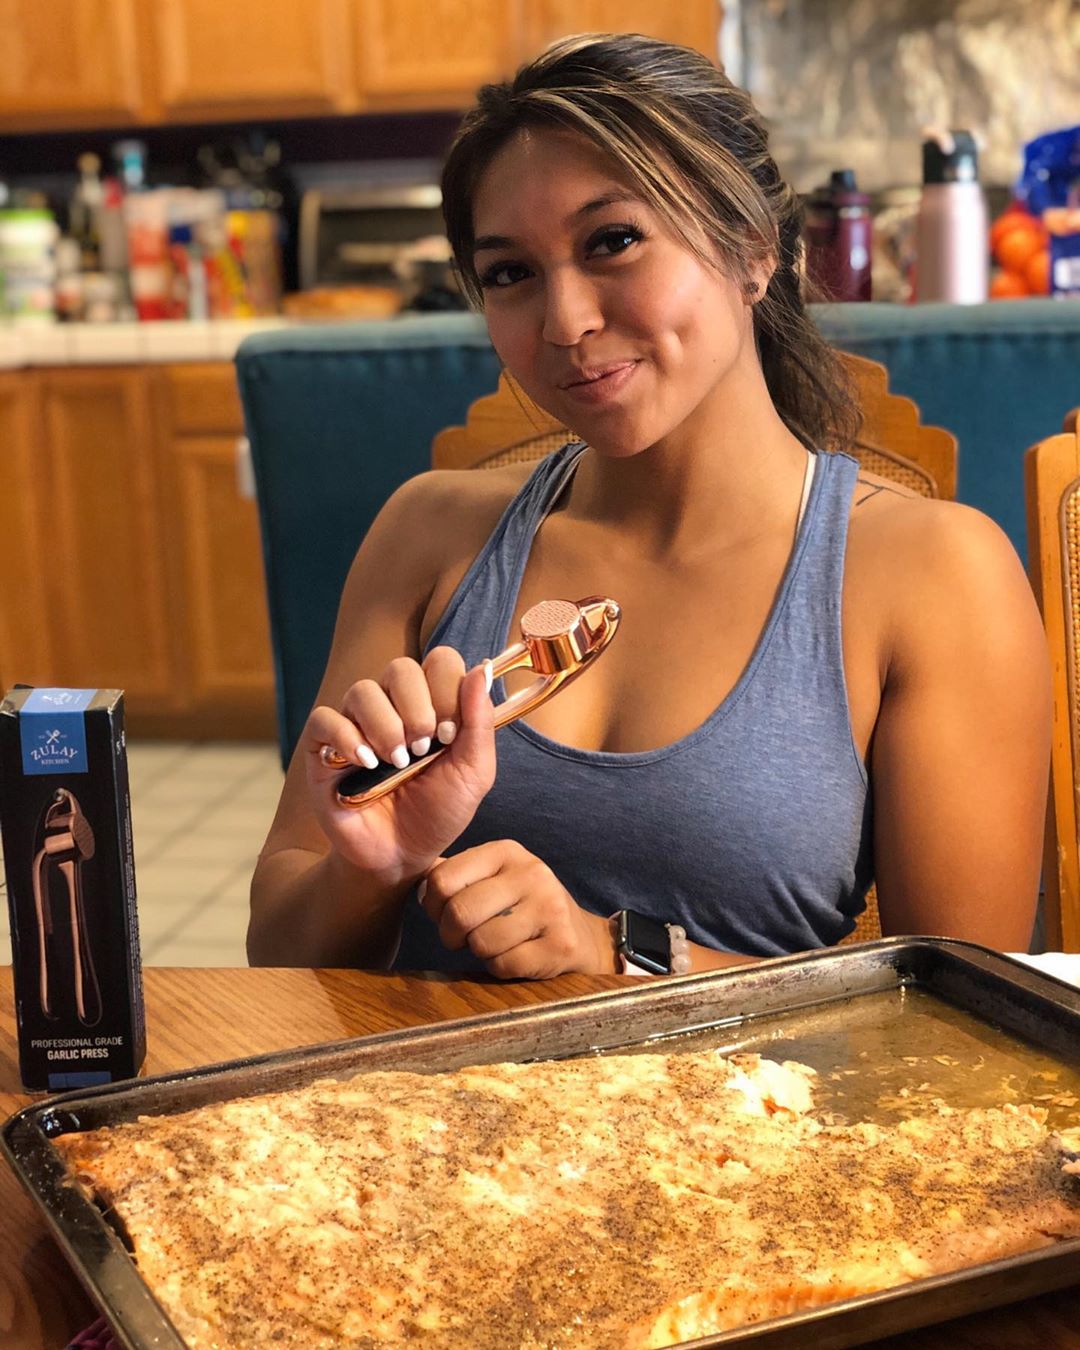 Cooking Has Been Easier With The Zulay Garlic Press Says Kimberly! - Zulay Kitchen